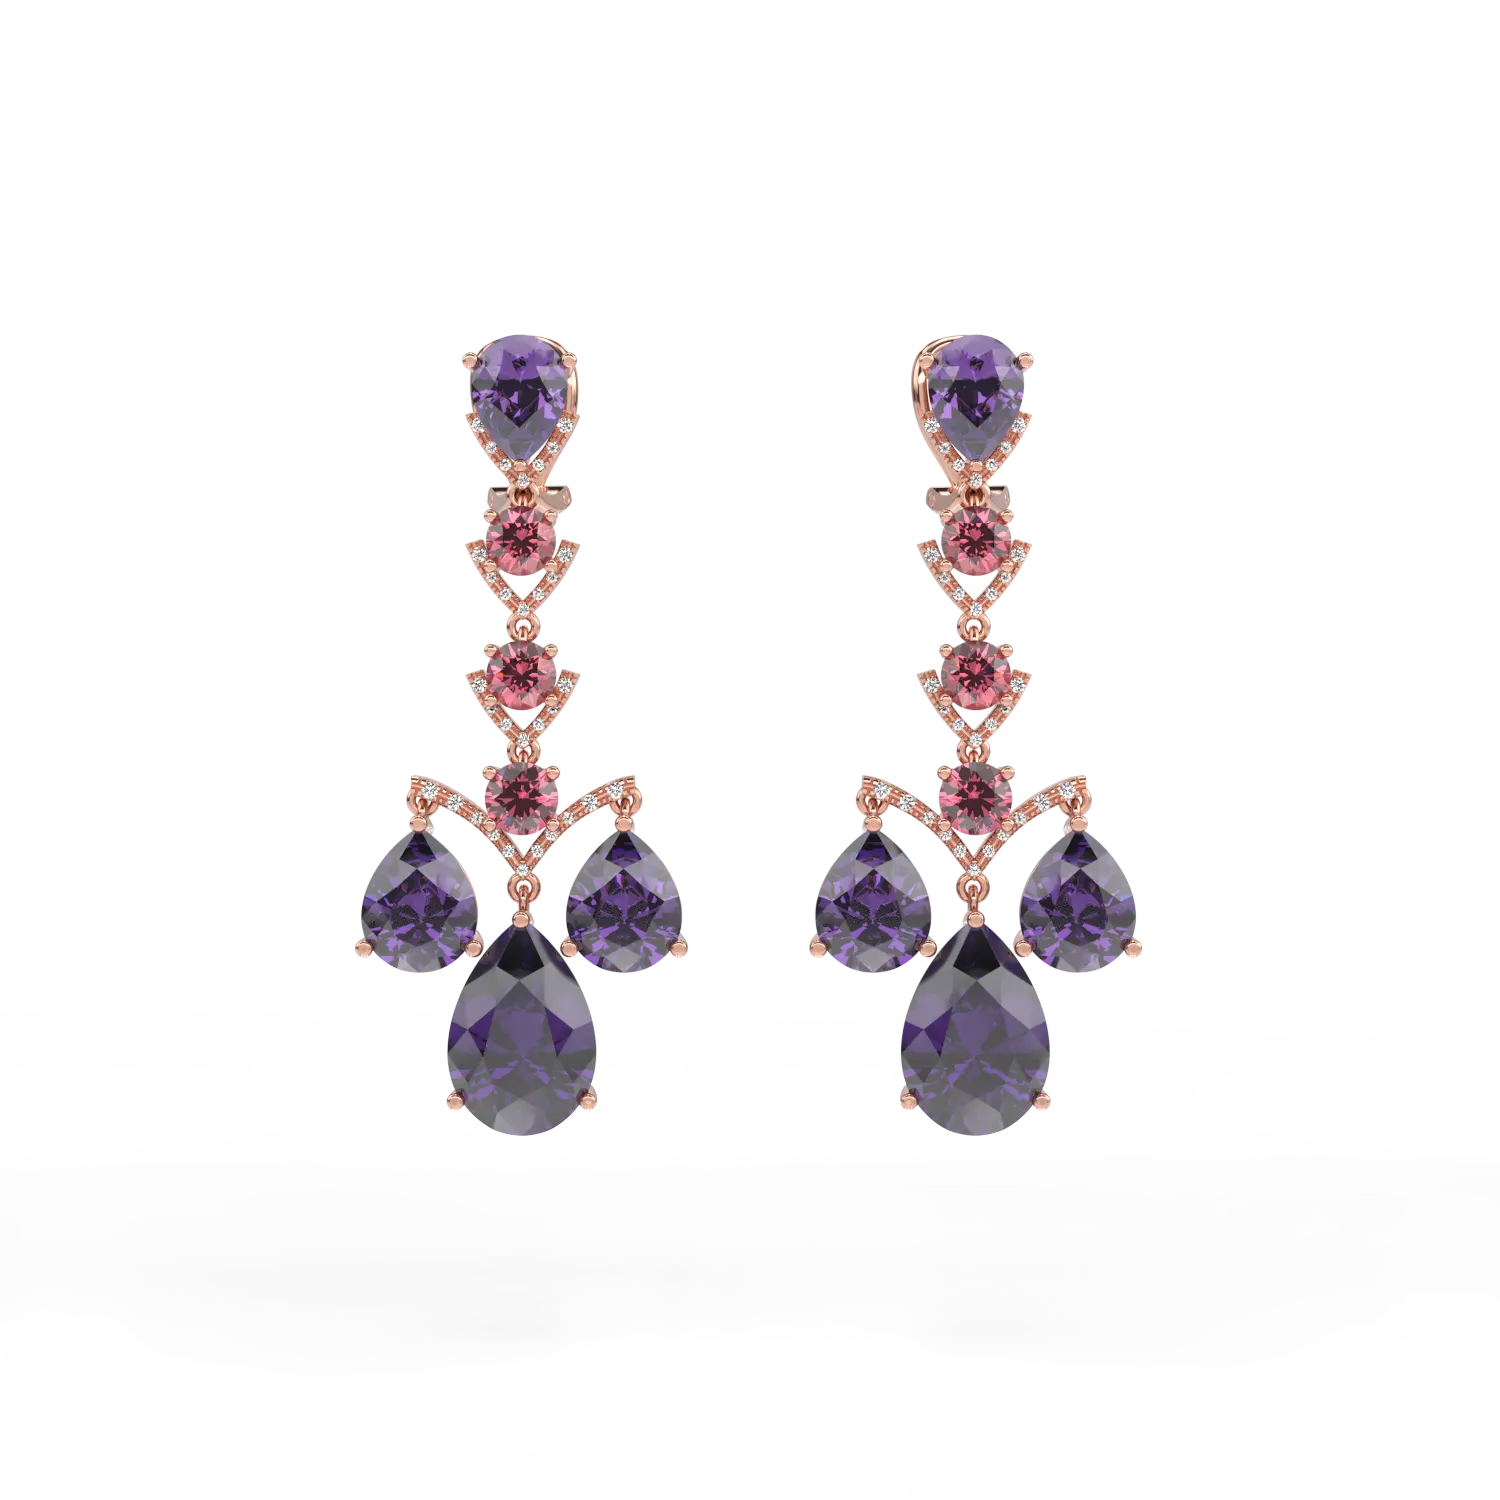 18K rose gold earrings with 27.37ct precious and semiprecious stones